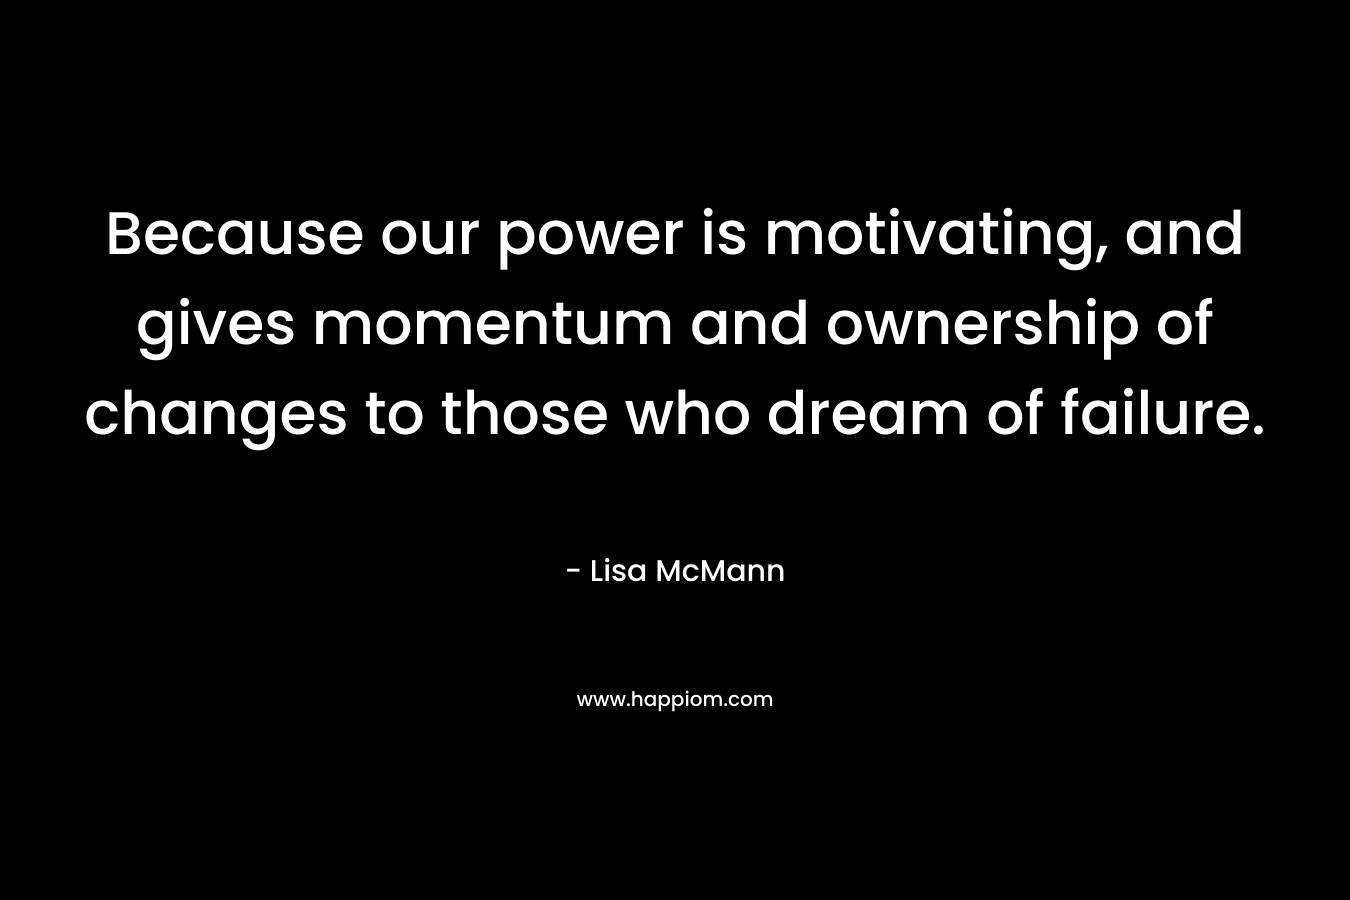 Because our power is motivating, and gives momentum and ownership of changes to those who dream of failure. – Lisa McMann